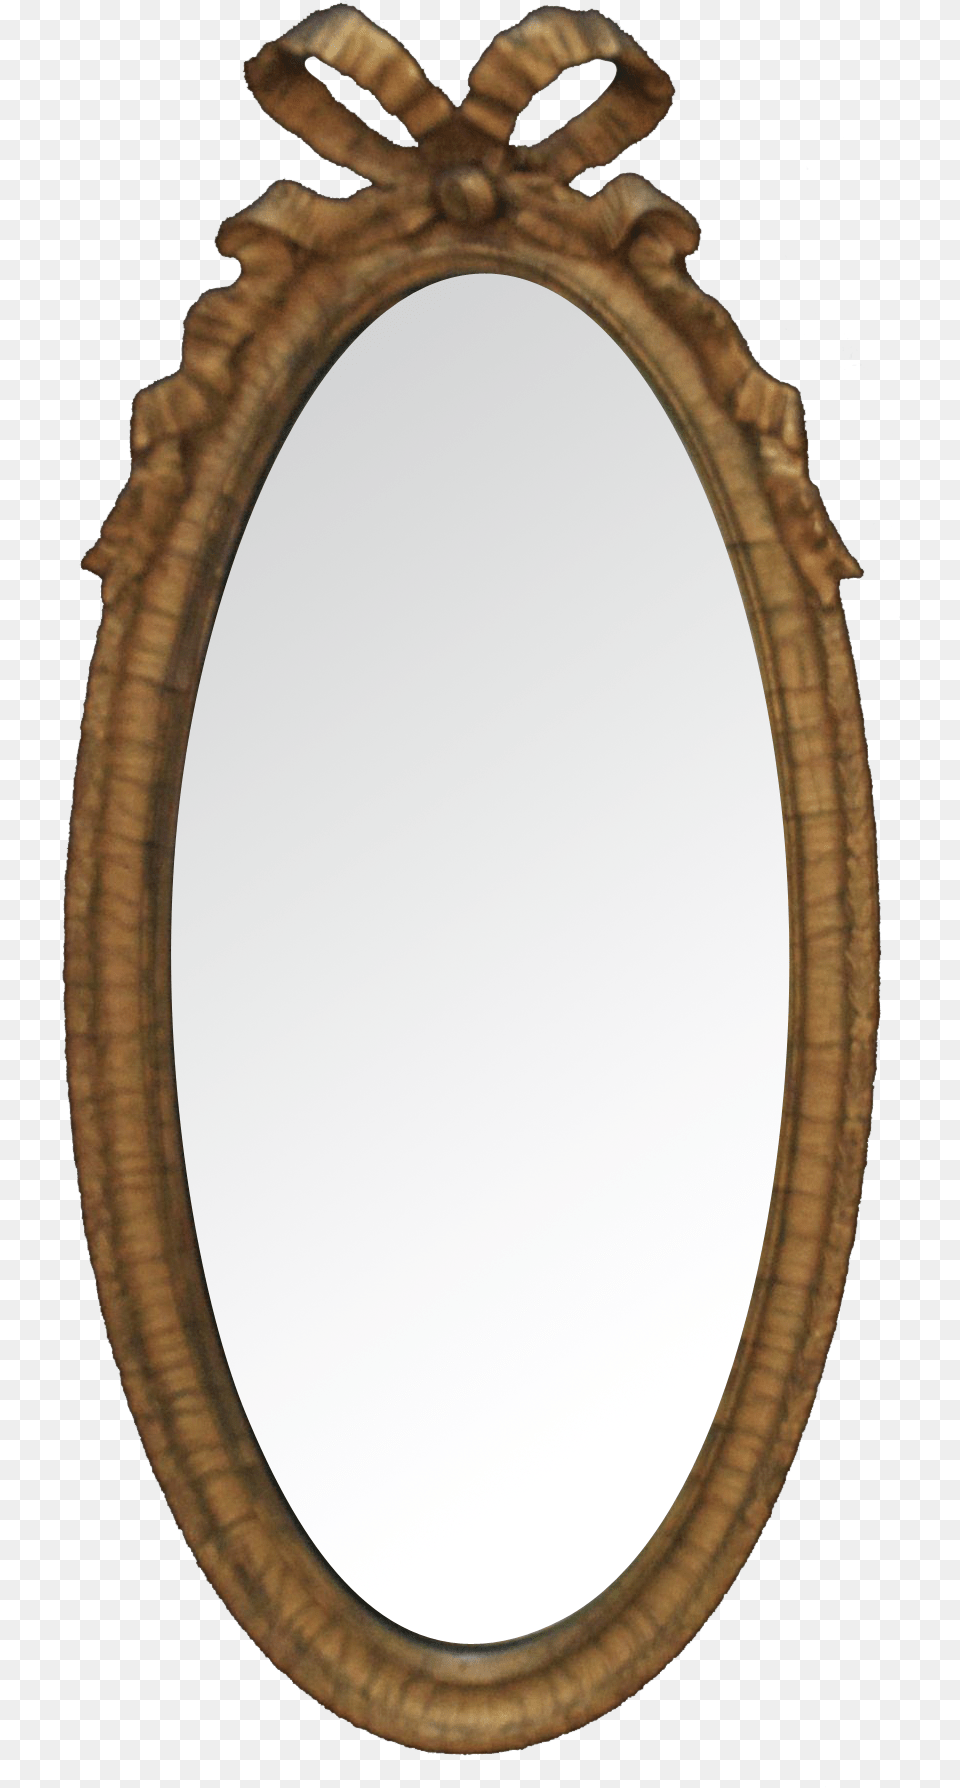 Your Antique Amp Collectable Frames Mirrors Shop Ribbon Mirror Frame, Oval, Photography Png Image